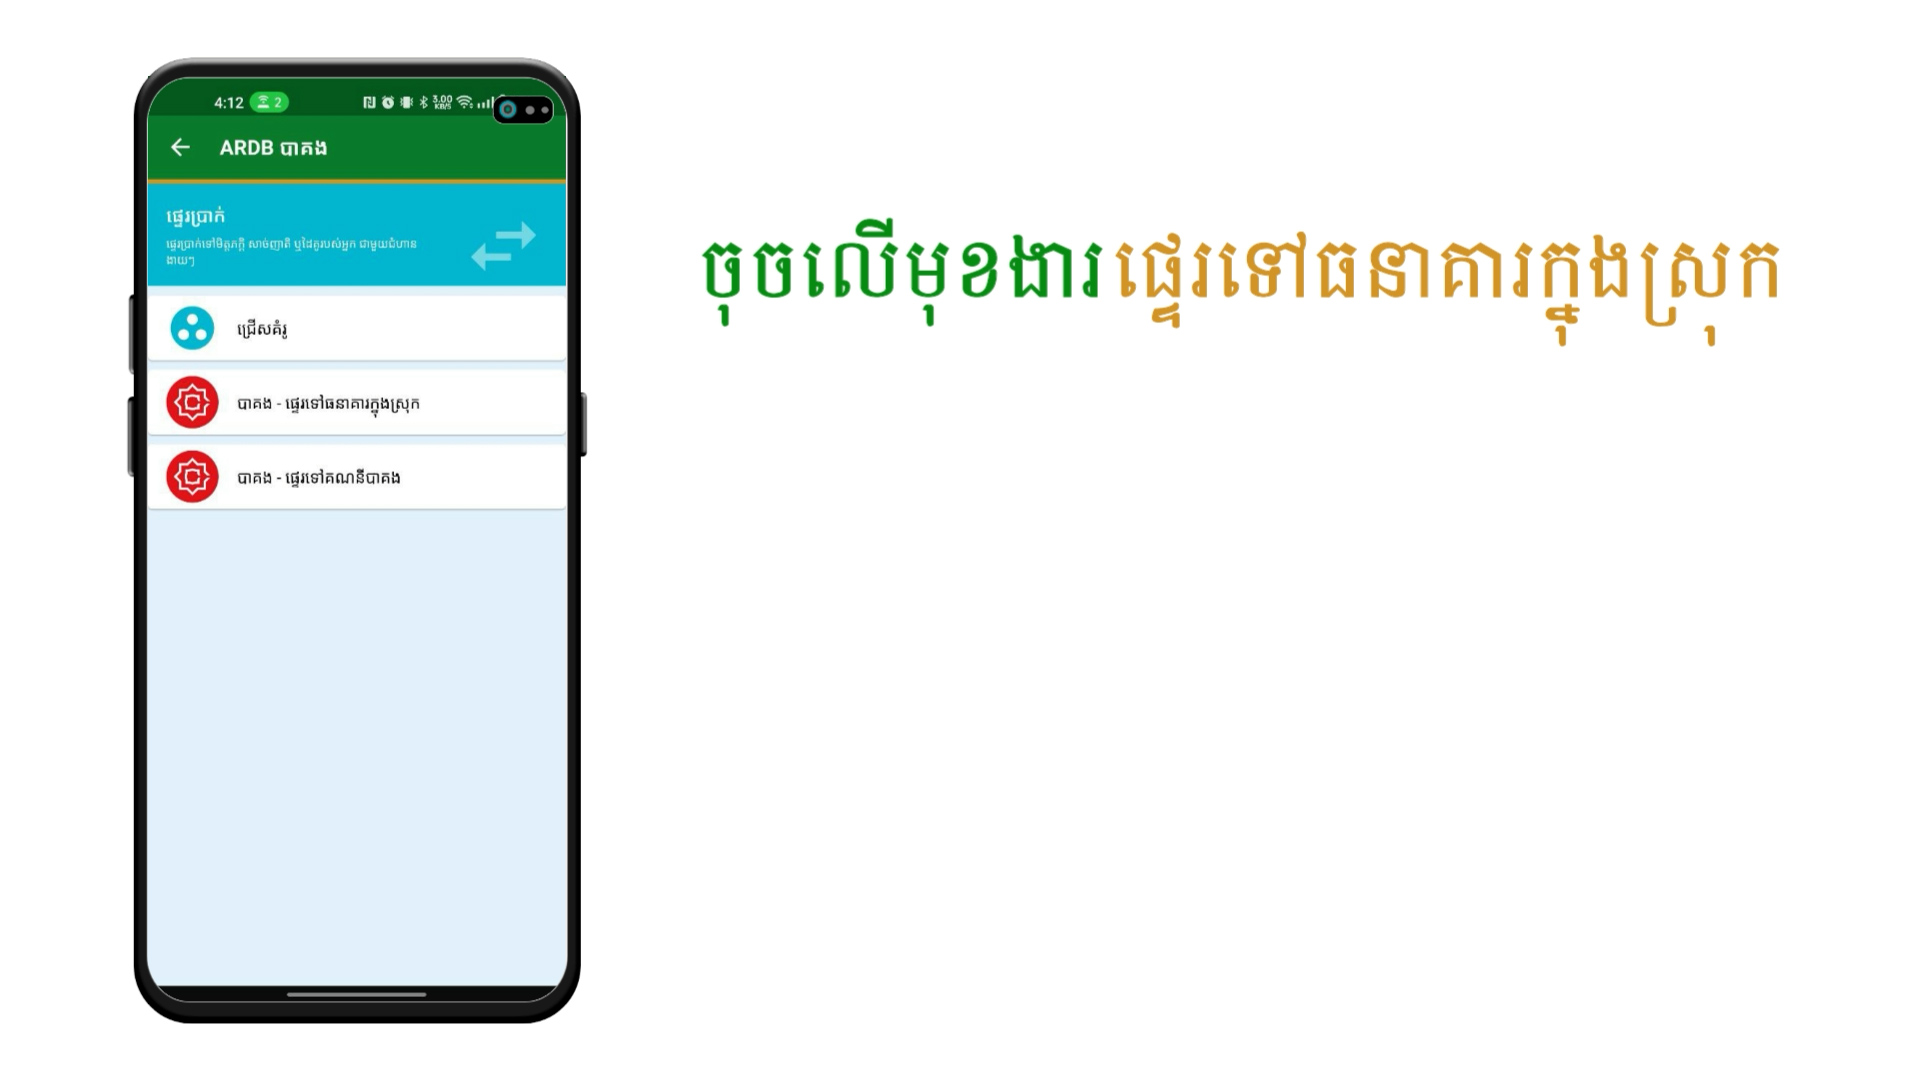 How to transfer to Bank and MFI’s Bakong members via ARDB Mobile app.